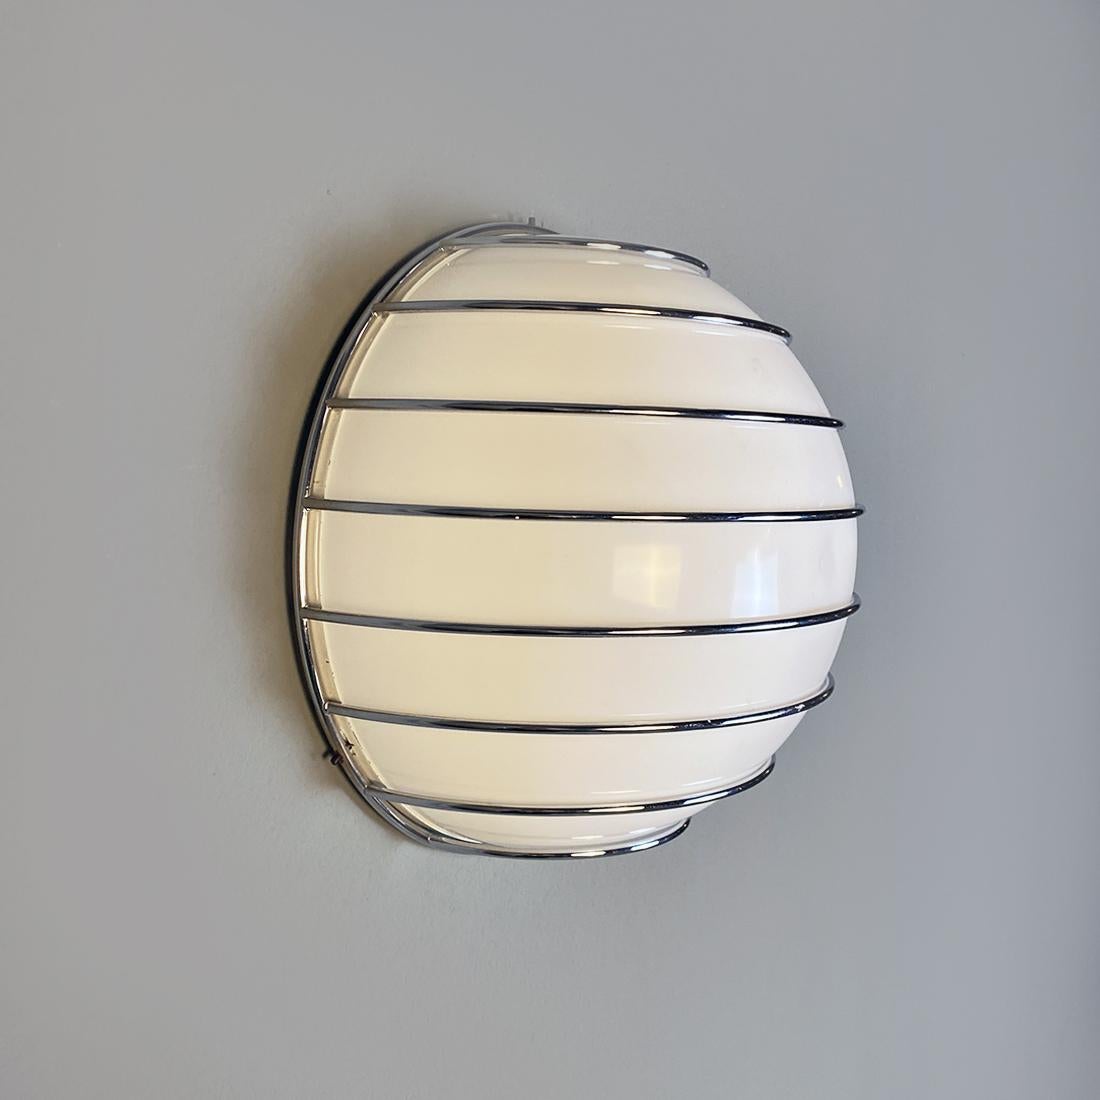 Italian Modern Metal Rod Structure and White Plastic Lampshade Wall Lamp, 1970s For Sale 5